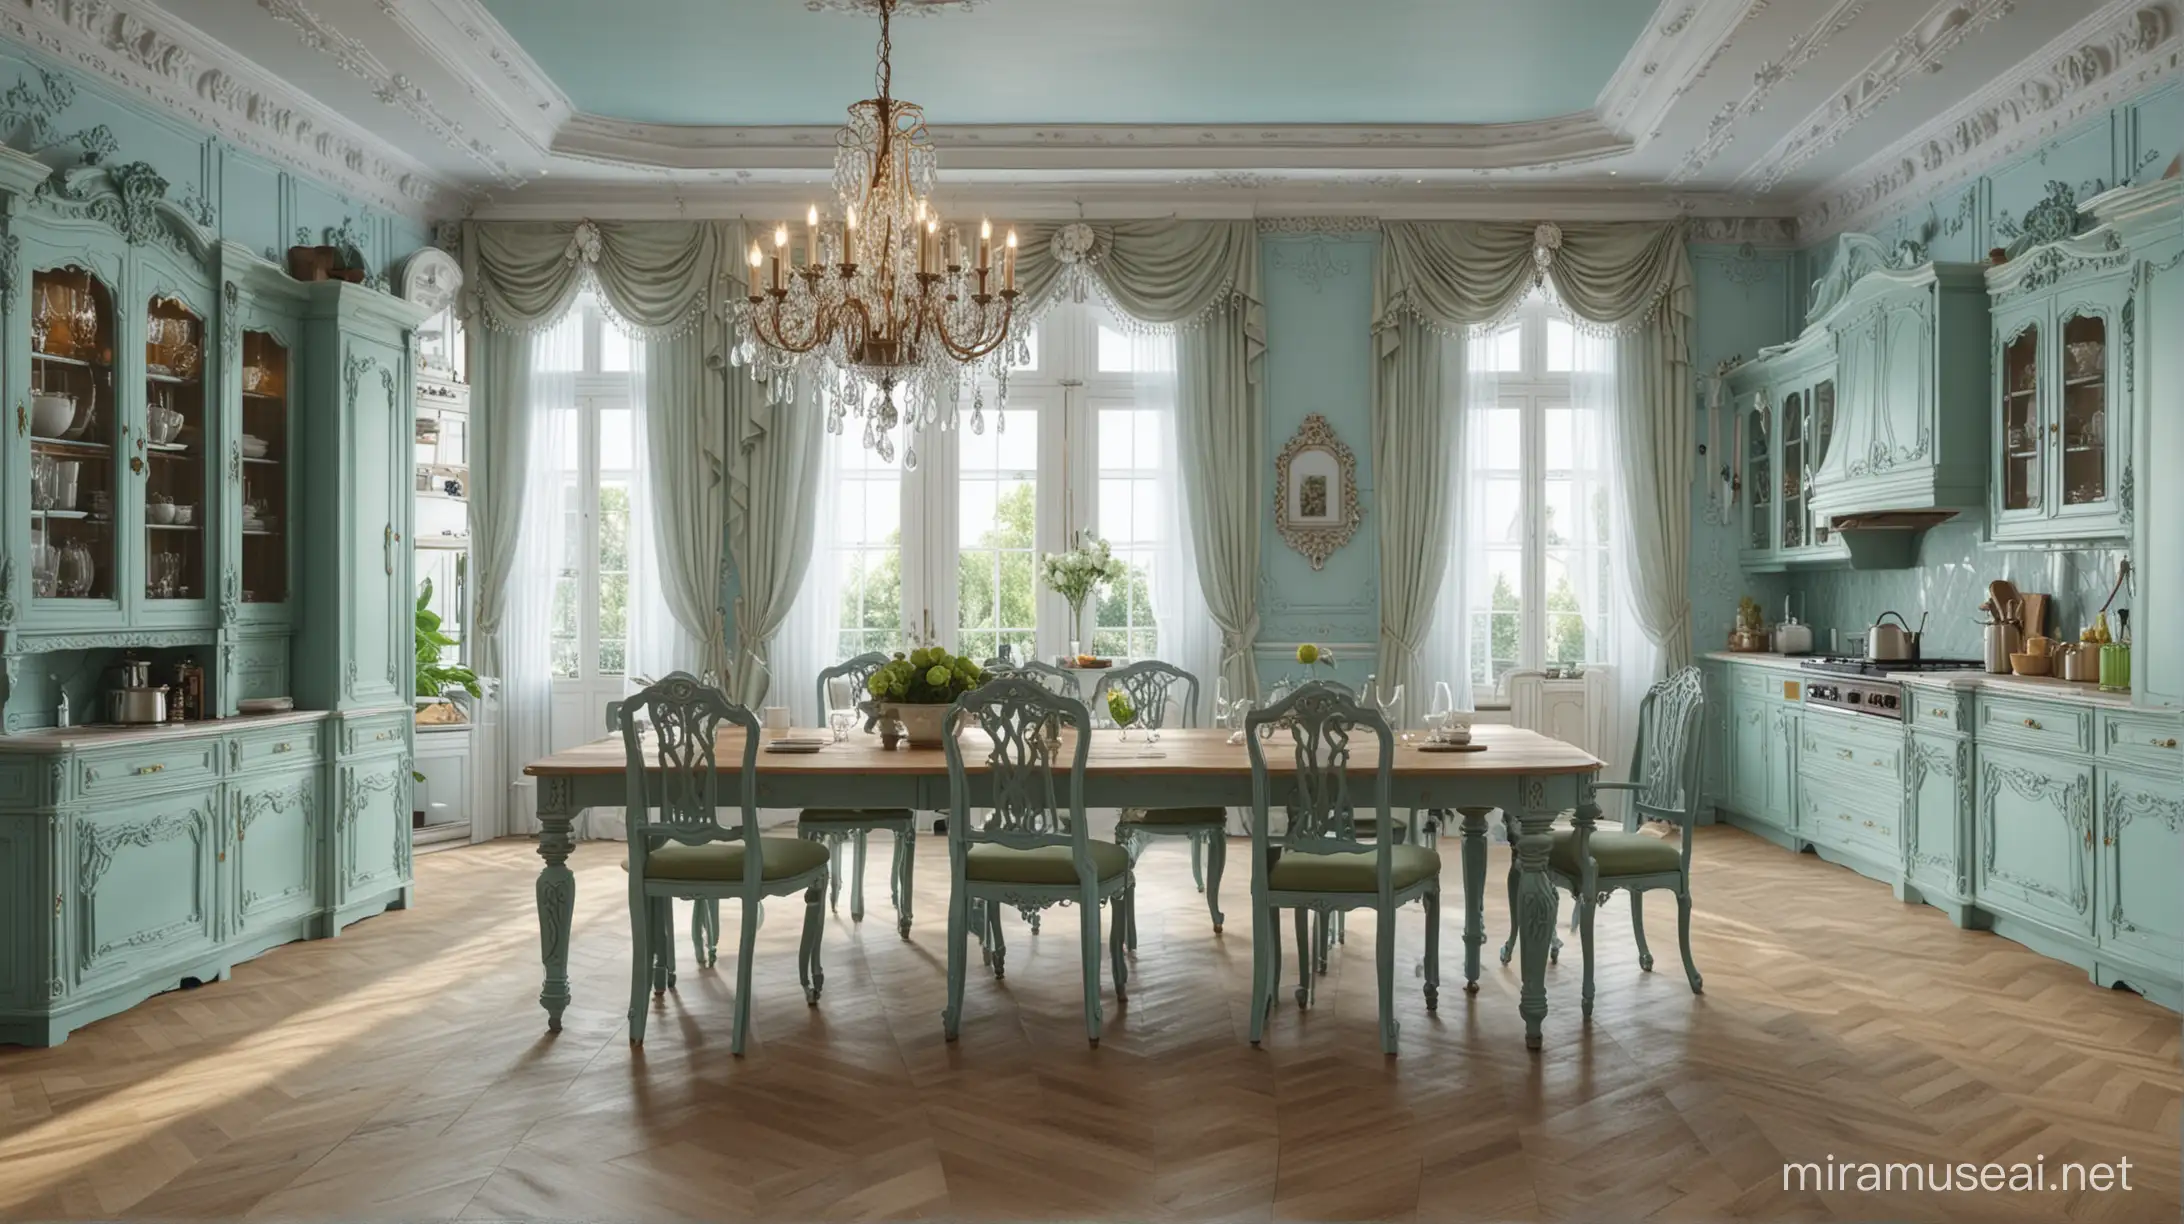 BaroqueStyle Luxury Kitchen with Light Blue and Green accents Chandelier Large Island Dining Table Vintage Furniture and French Windows 32K UHD Realistic HighQuality Photography